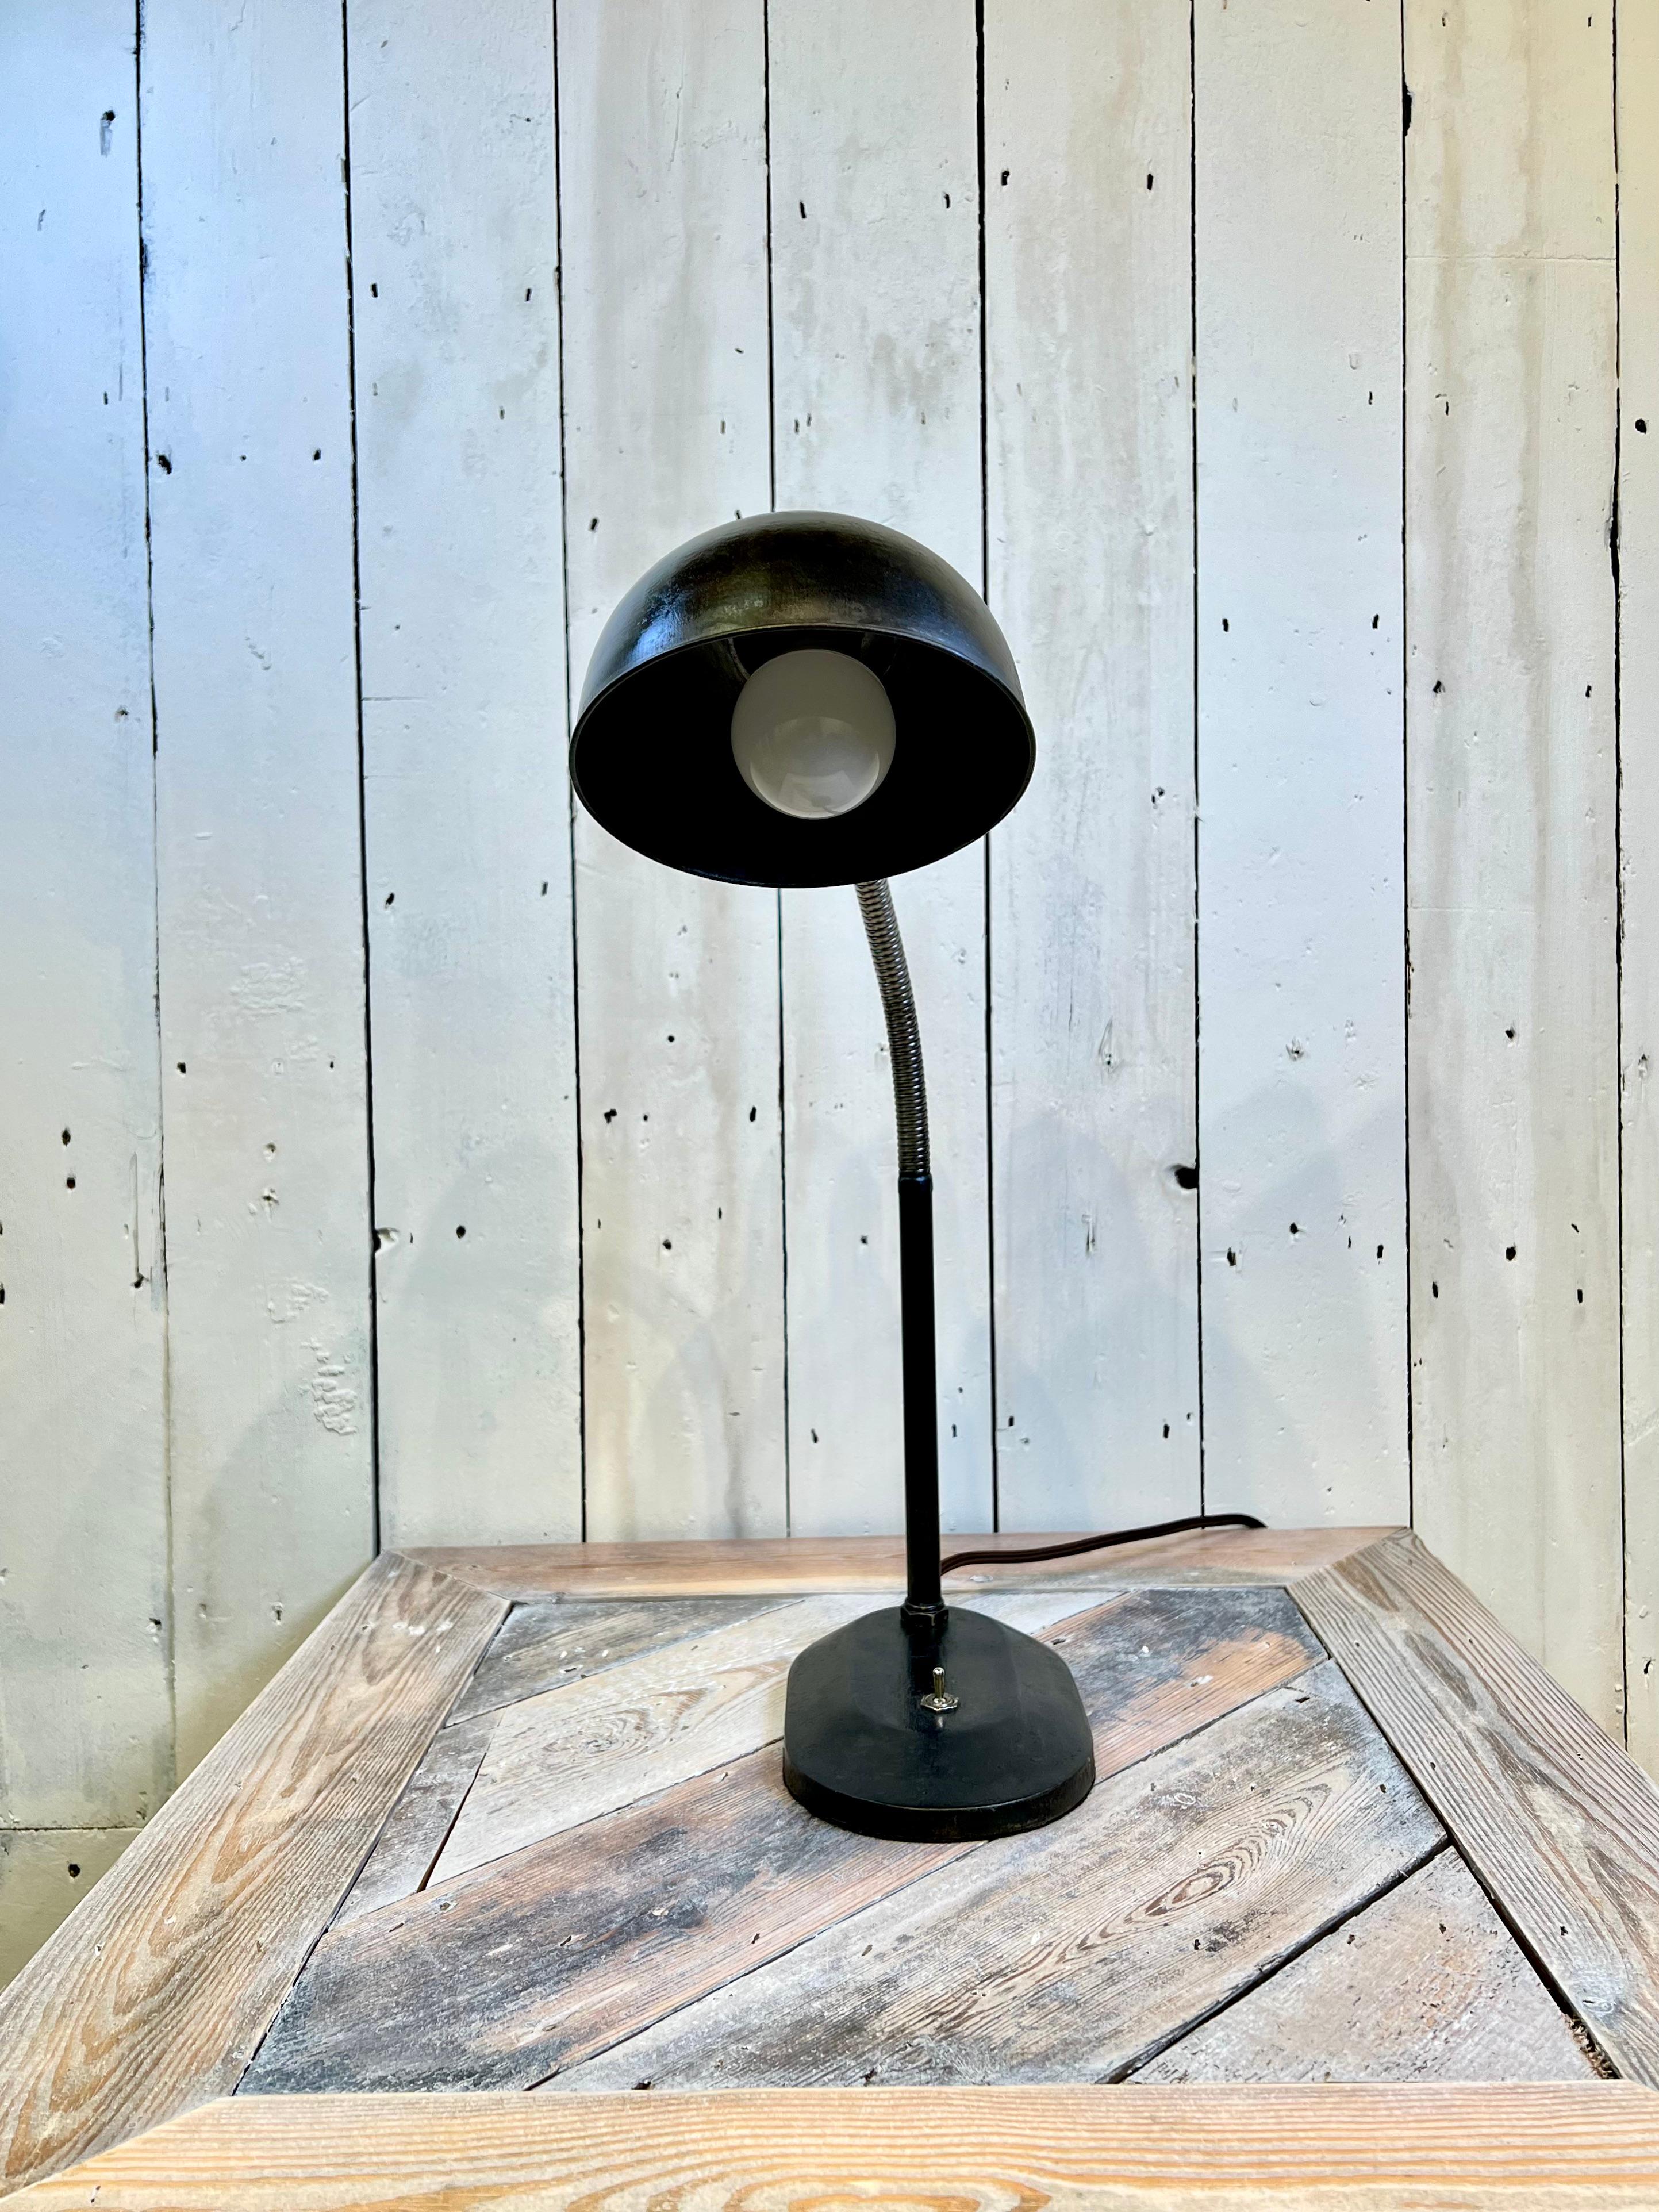 Introduce a piece of timeless design with this 1930's Christian Dell Lighting Design and Bauhaus influenced modernist black desk lamp. The sleek and minimalist silhouette showcases the iconic Bauhaus style, with a sharp geometric form and a bold use